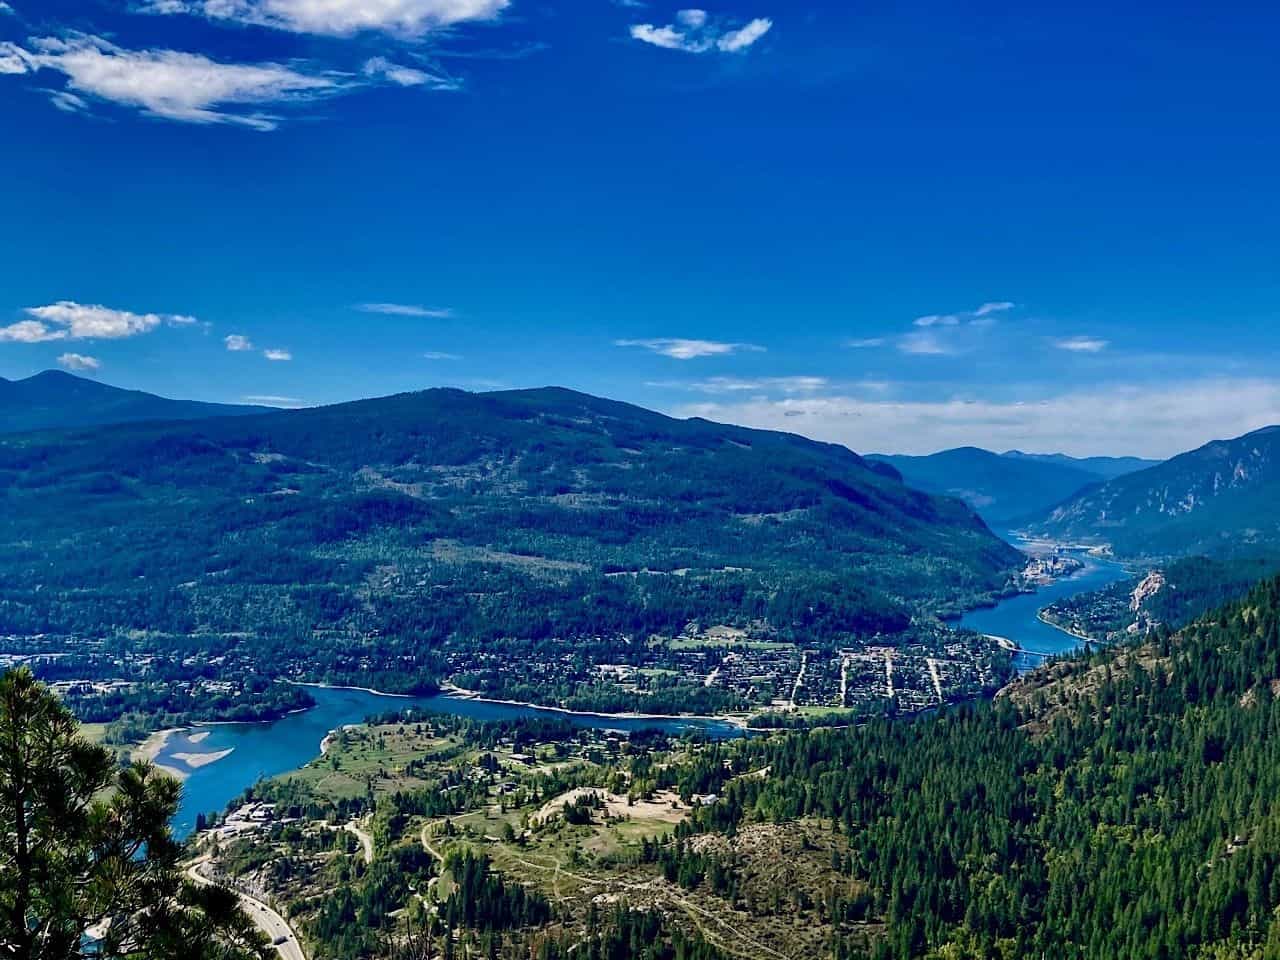 Things to Do in Castlegar BC. Home of two large rivers and a small city set in forested mountain valley.